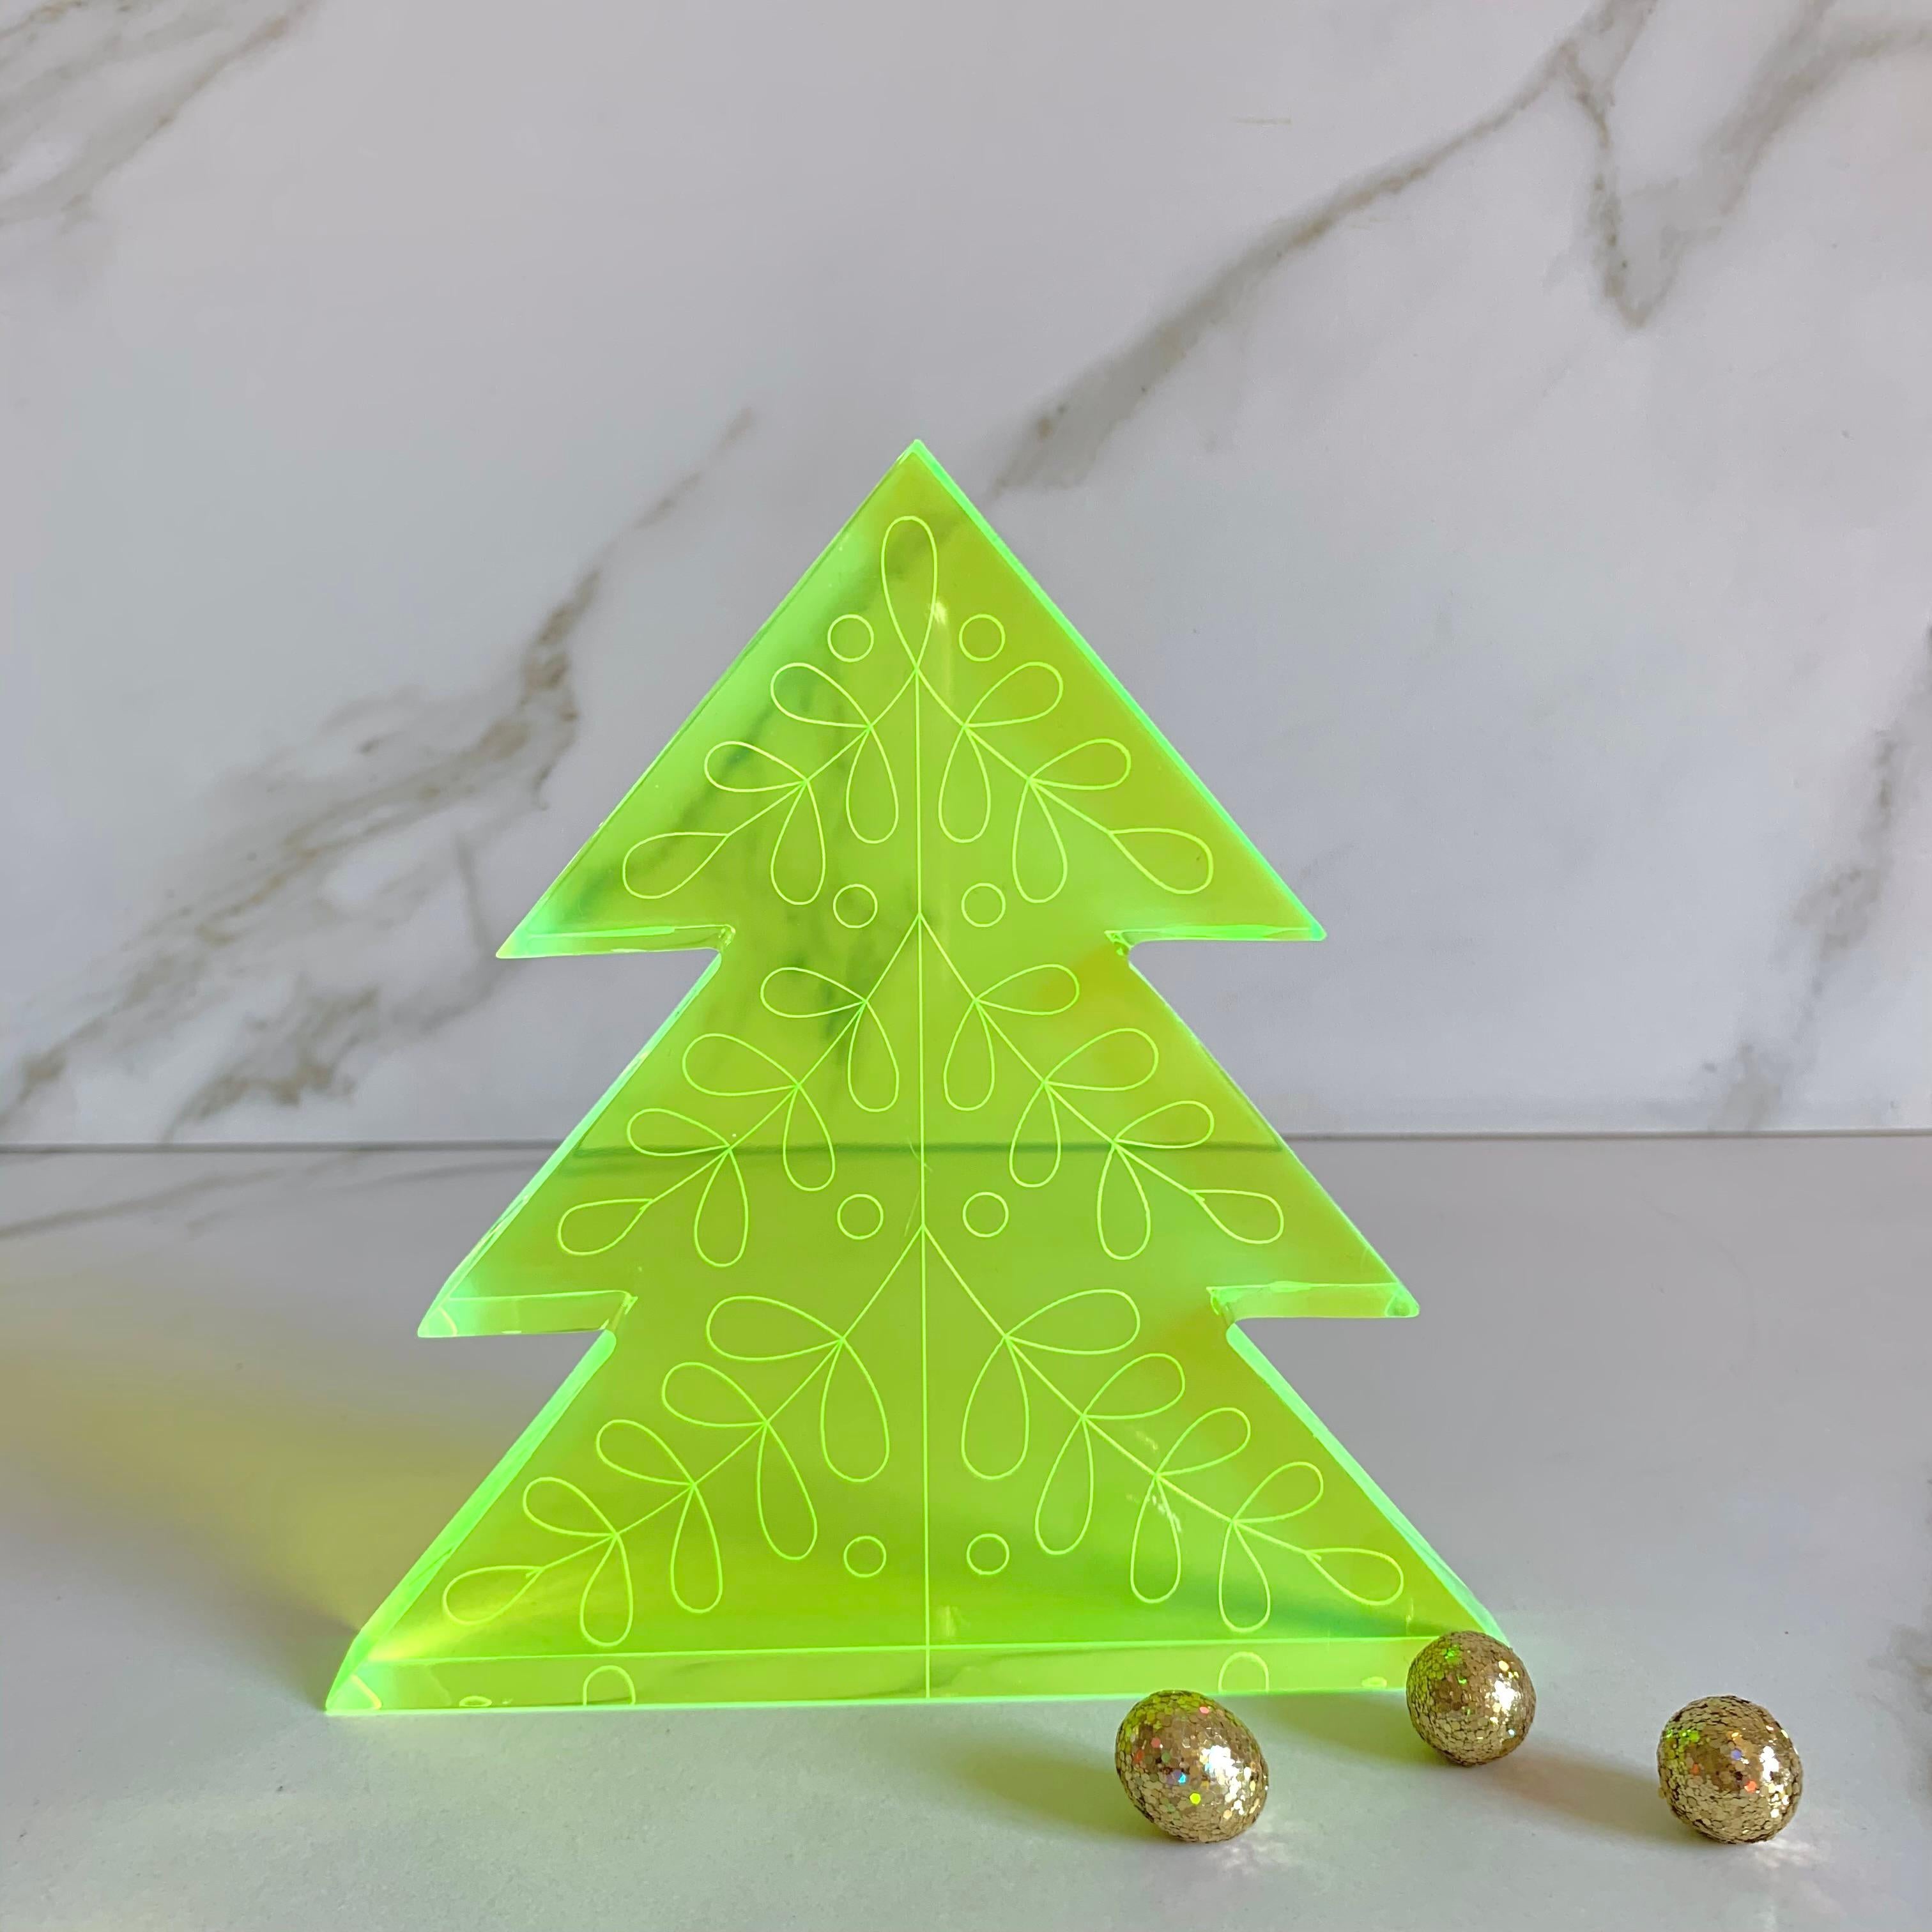 Christmas is a season of joy and, for us that means color! Celebrate the season with this colorful, fun and modern Christmas Tree sculptures, and give a new twist to the traditional Christmas color palette. This sculptures will look merry and bright